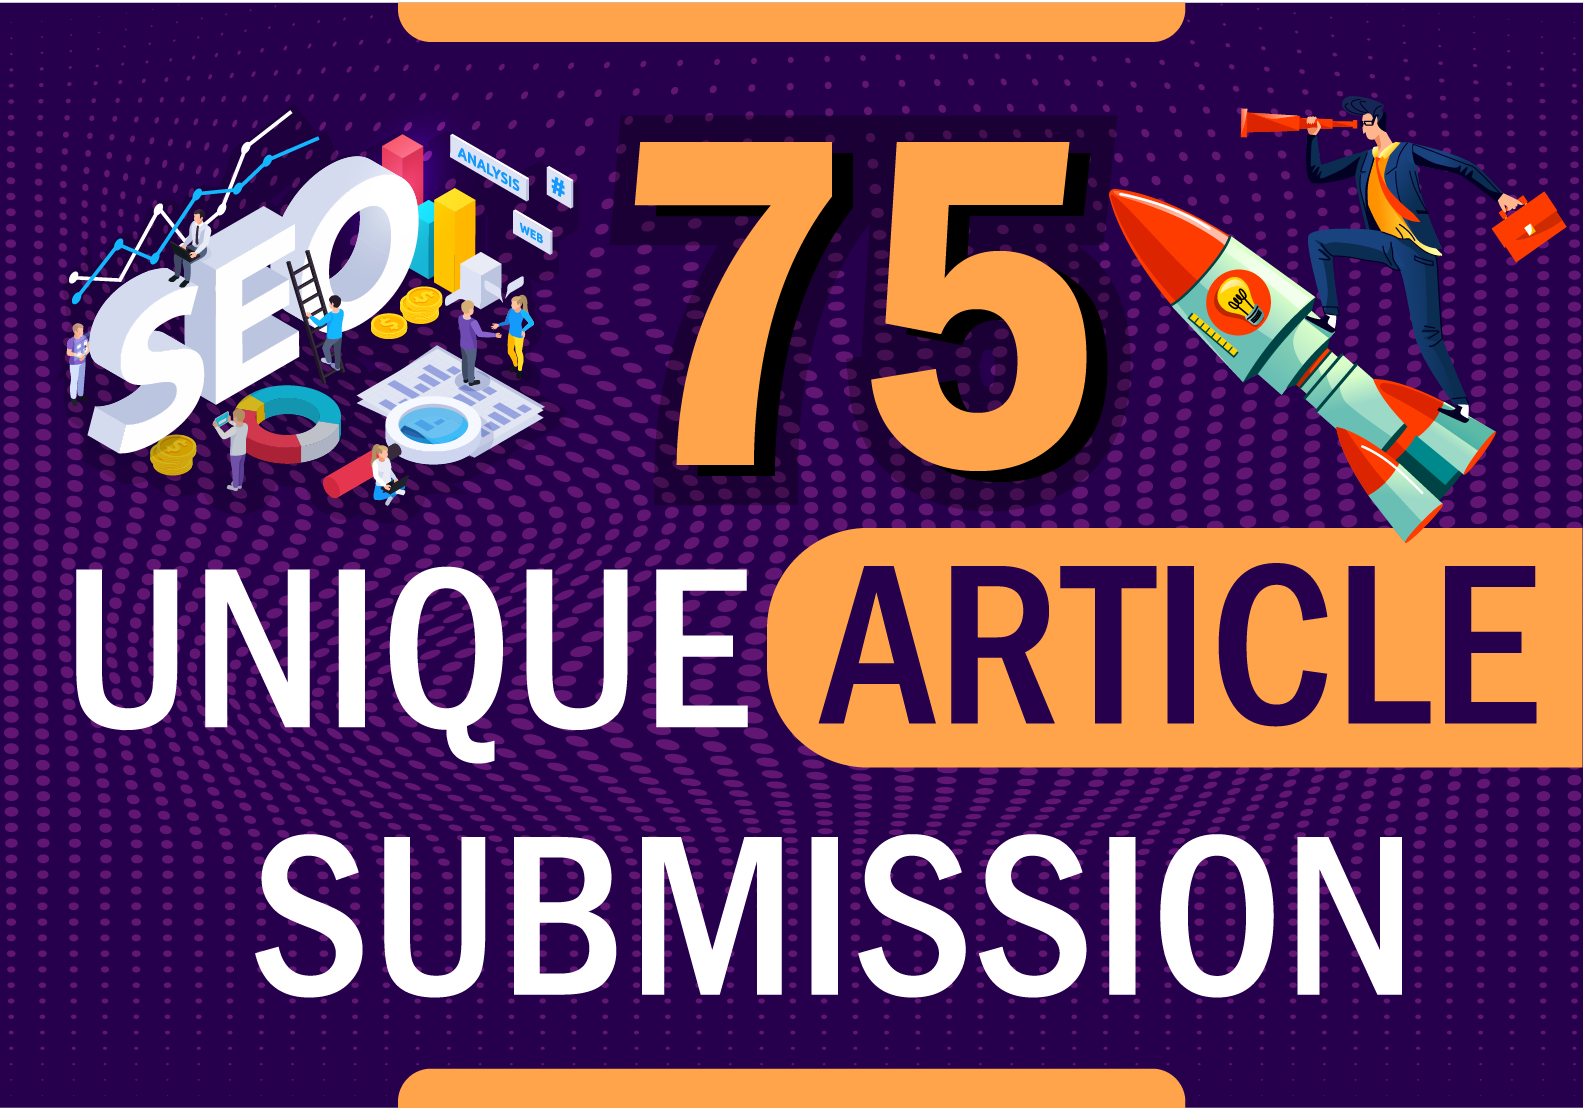 I Will do 75 Article Submission With Unique Domain in 5$